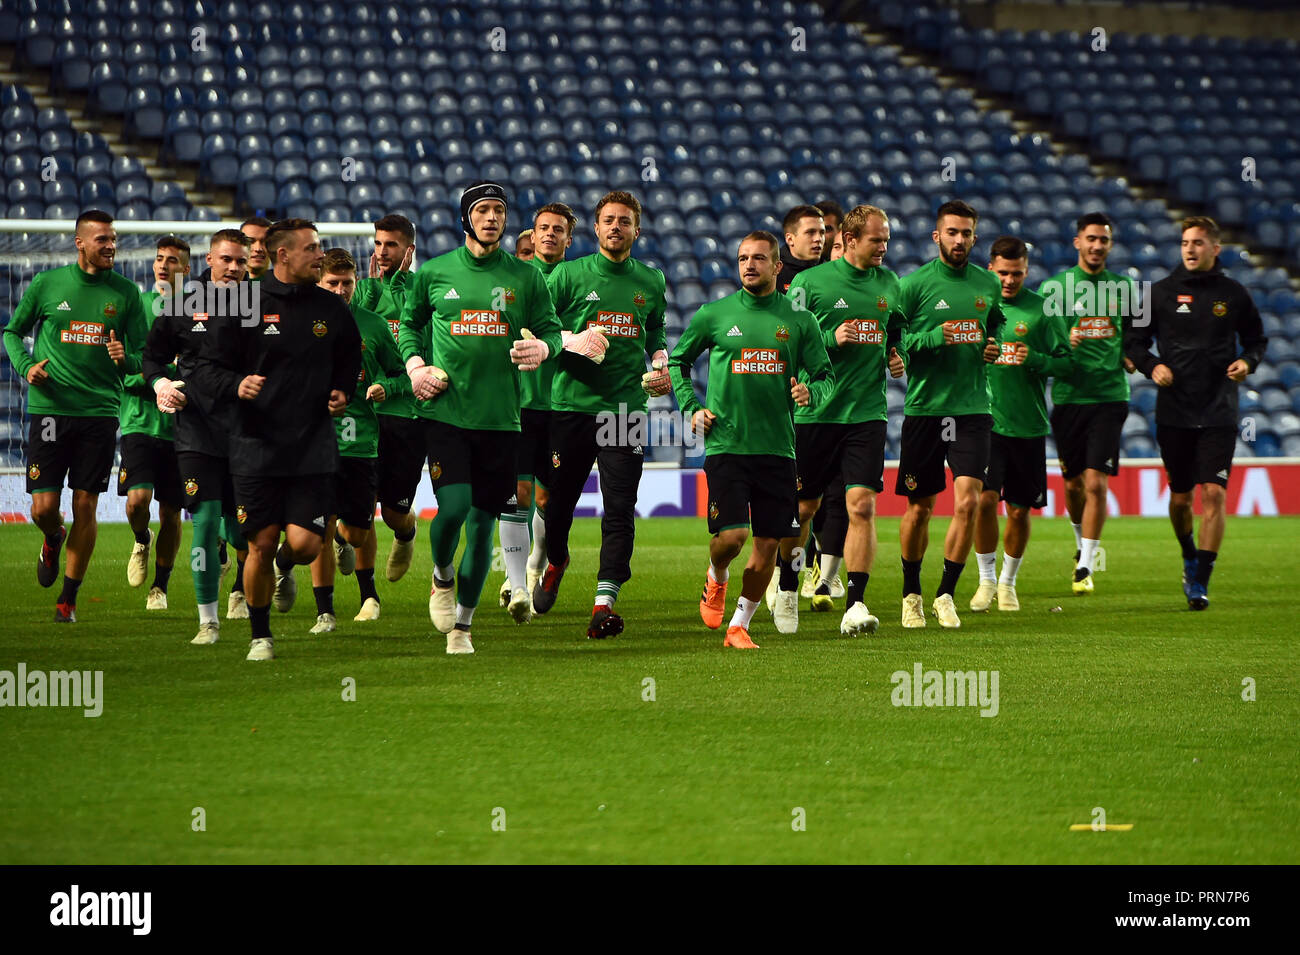 Glasgow, Scotland. Wednesday 3rd October 2018.   The Rapid Wein squad takes part in a team training session ahead of their Europa League Matchday 2 match against Glasgow Rangers at Ibrox Stadium, Glasgow, Scotland on Wednesday 3rd October 2018 2018.   Picture Andy Buchanan Credit: Andy Buchanan/Alamy Live News Stock Photo